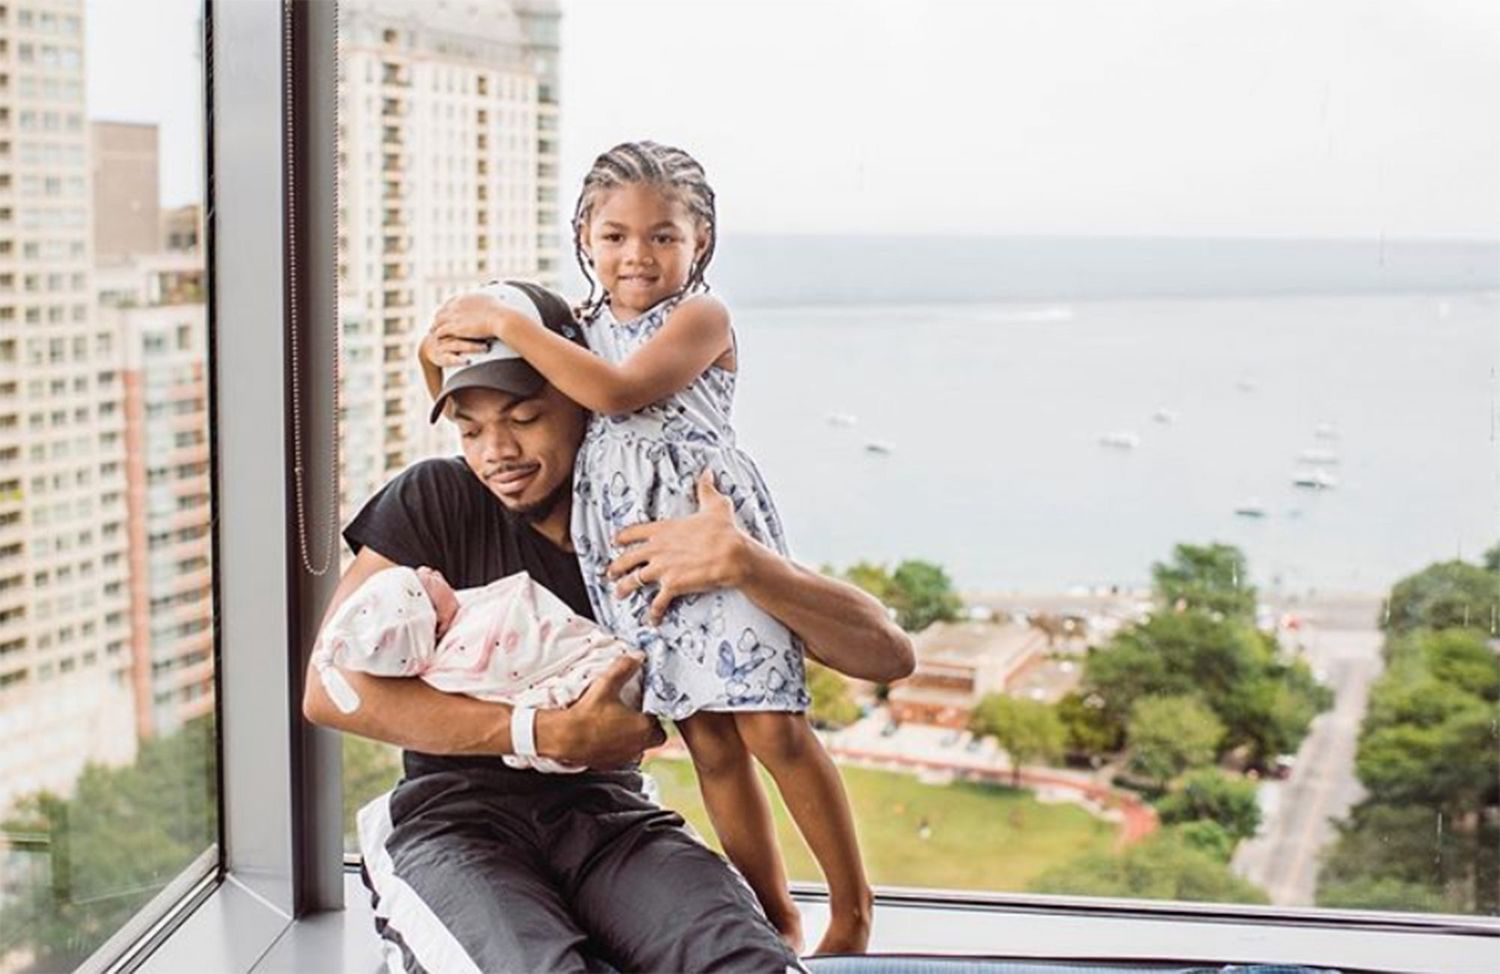 Chance the Rapper daughters